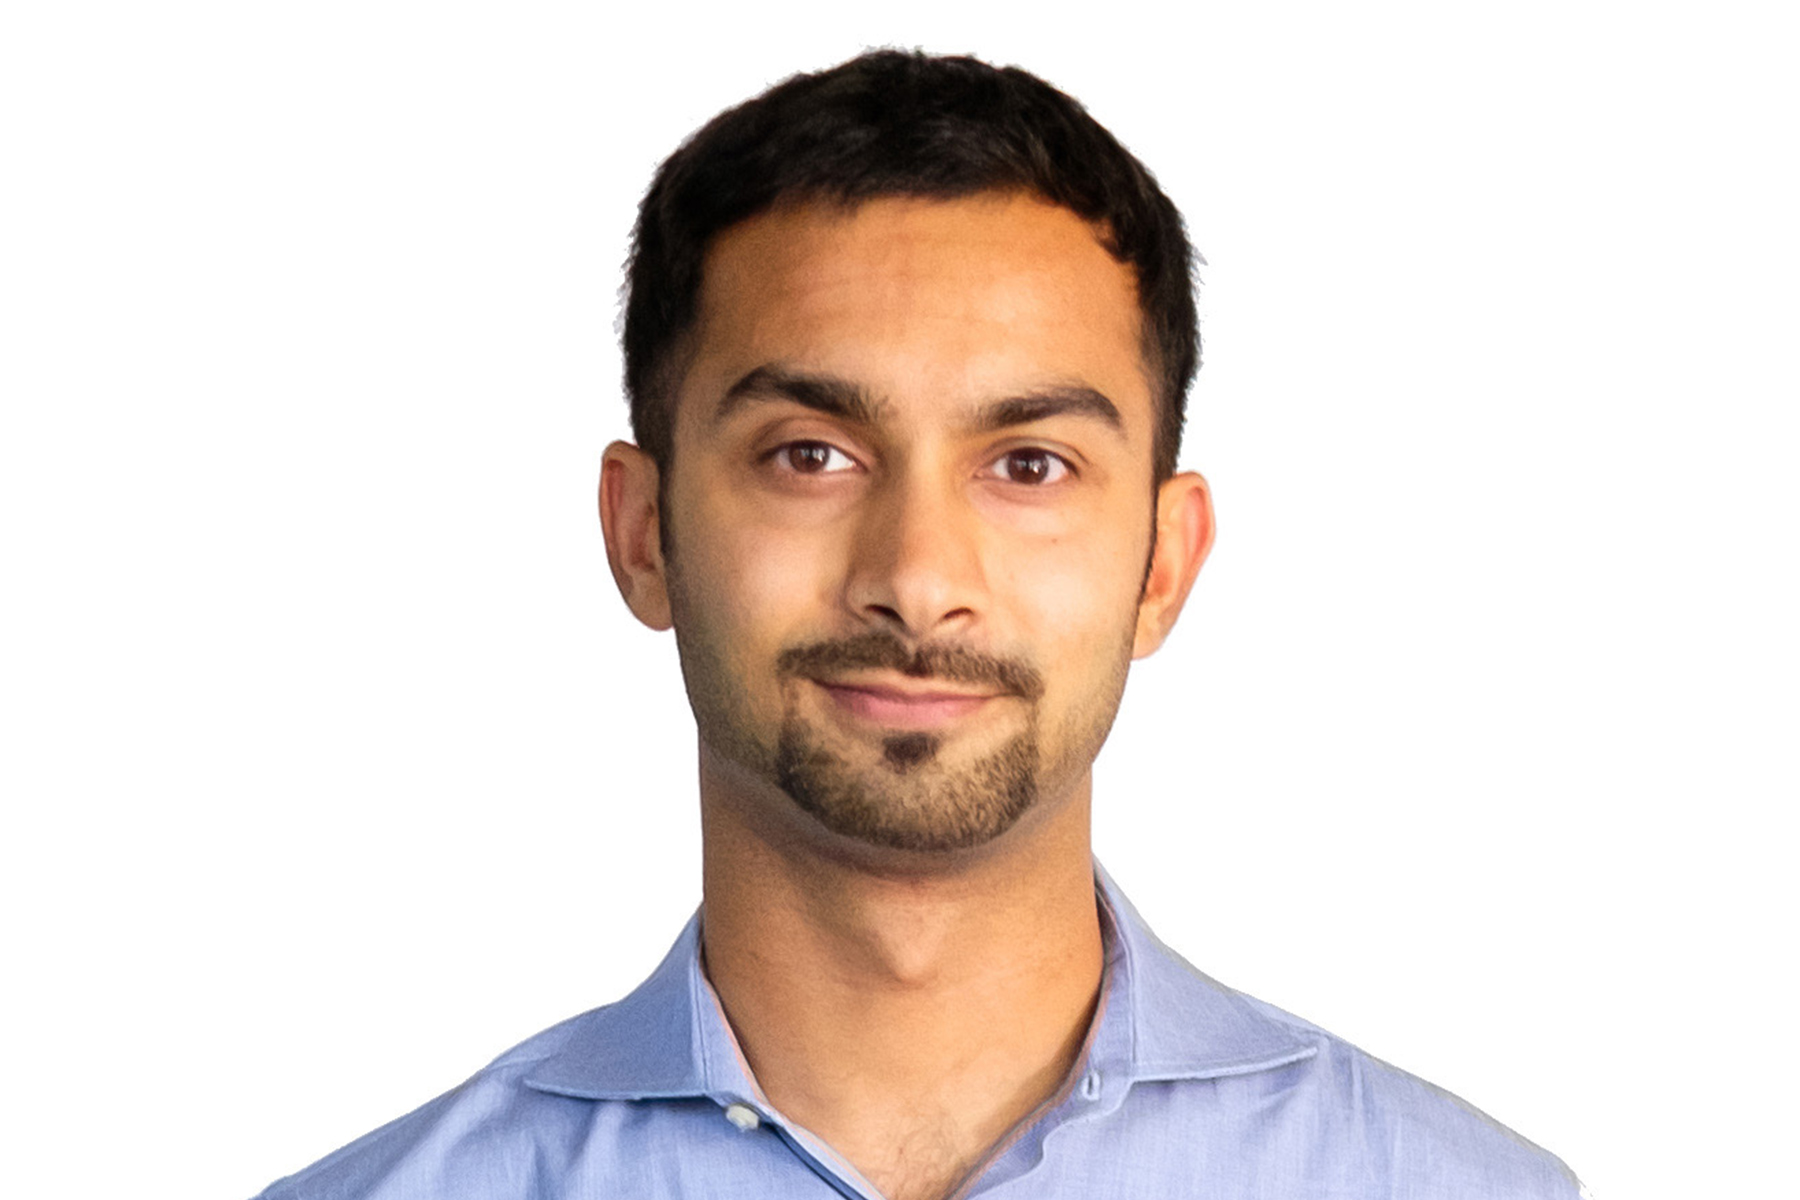 A headshot of Instacart co-founder and CEO Apoorva Mehta